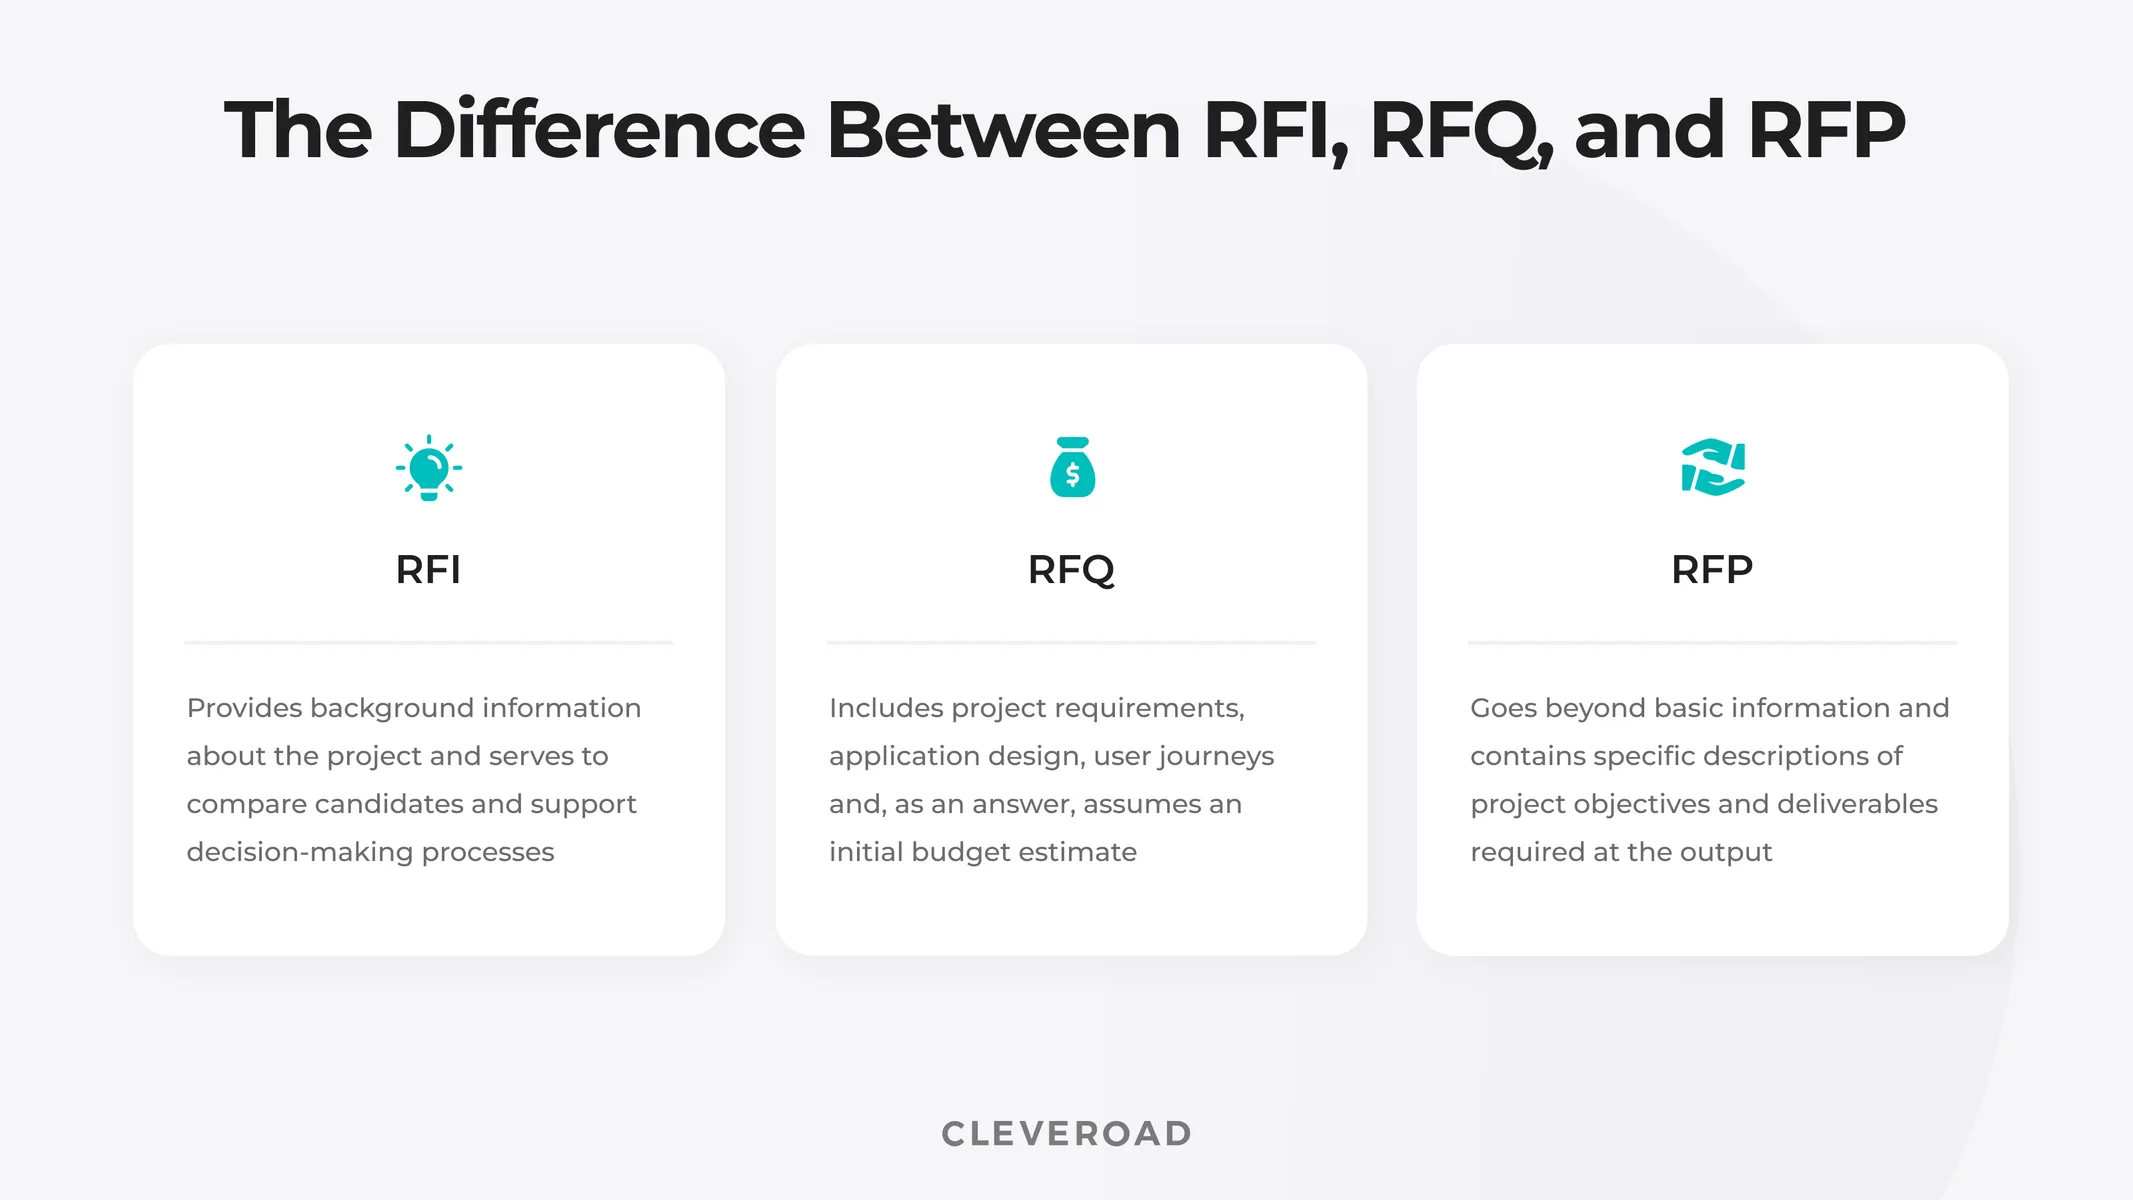 The difference between RFI, RFQ, and RFP